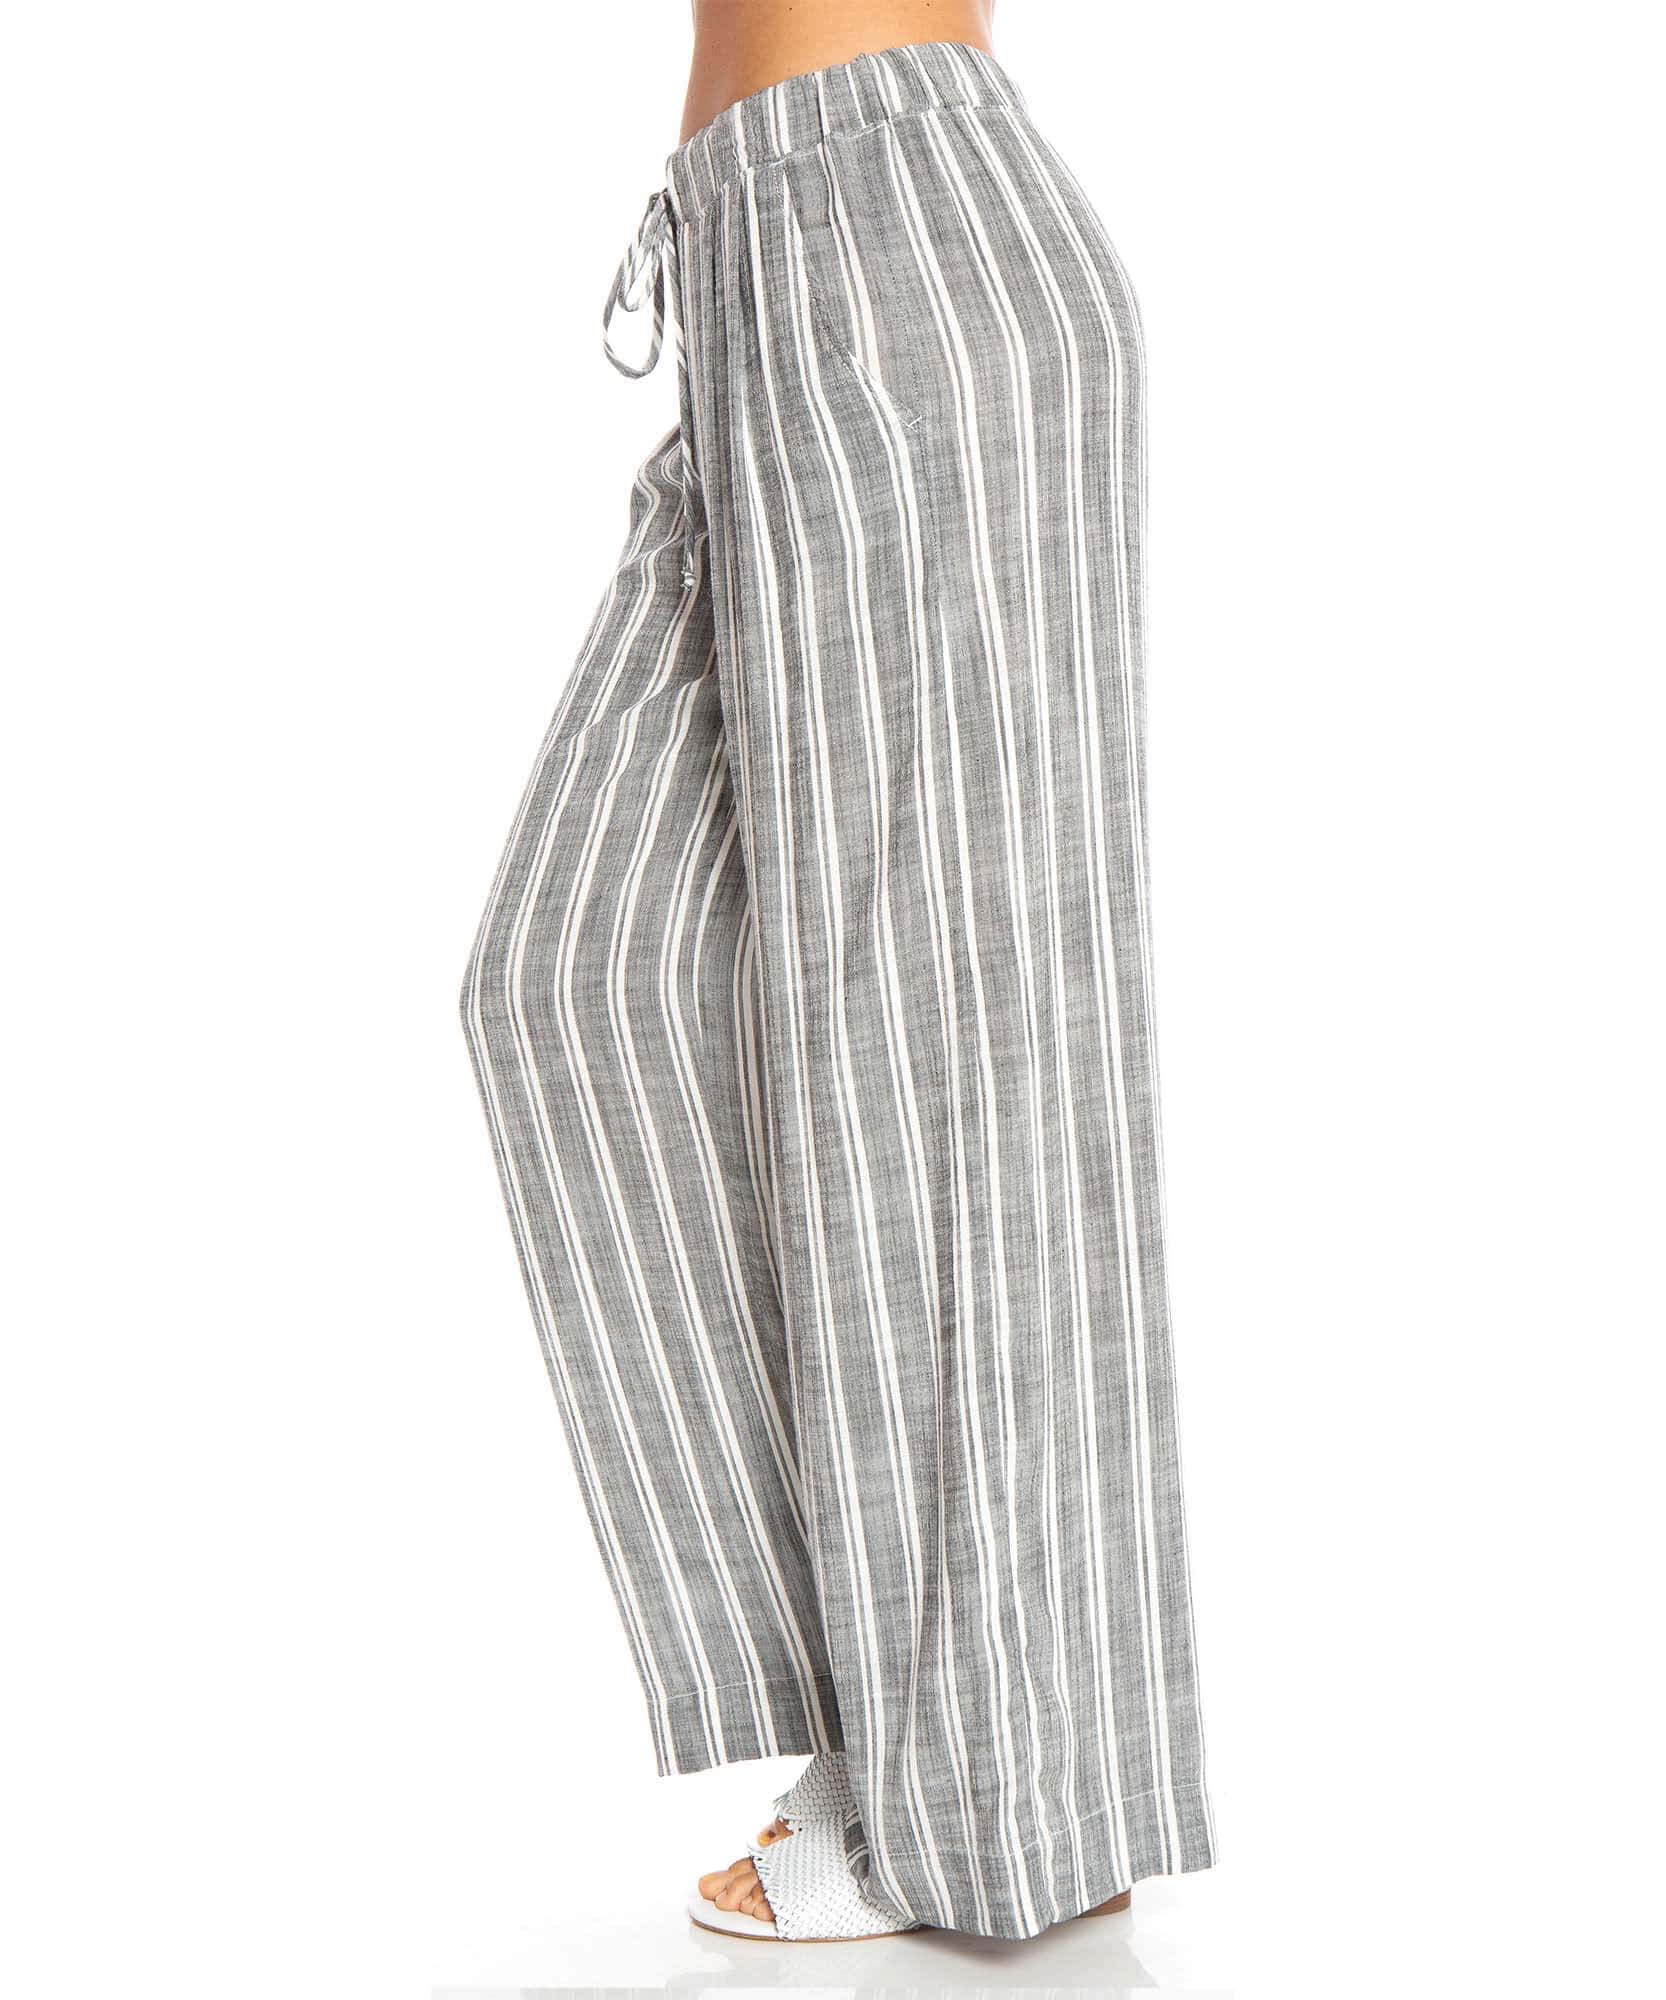 Pleated Front Wide Leg Pant